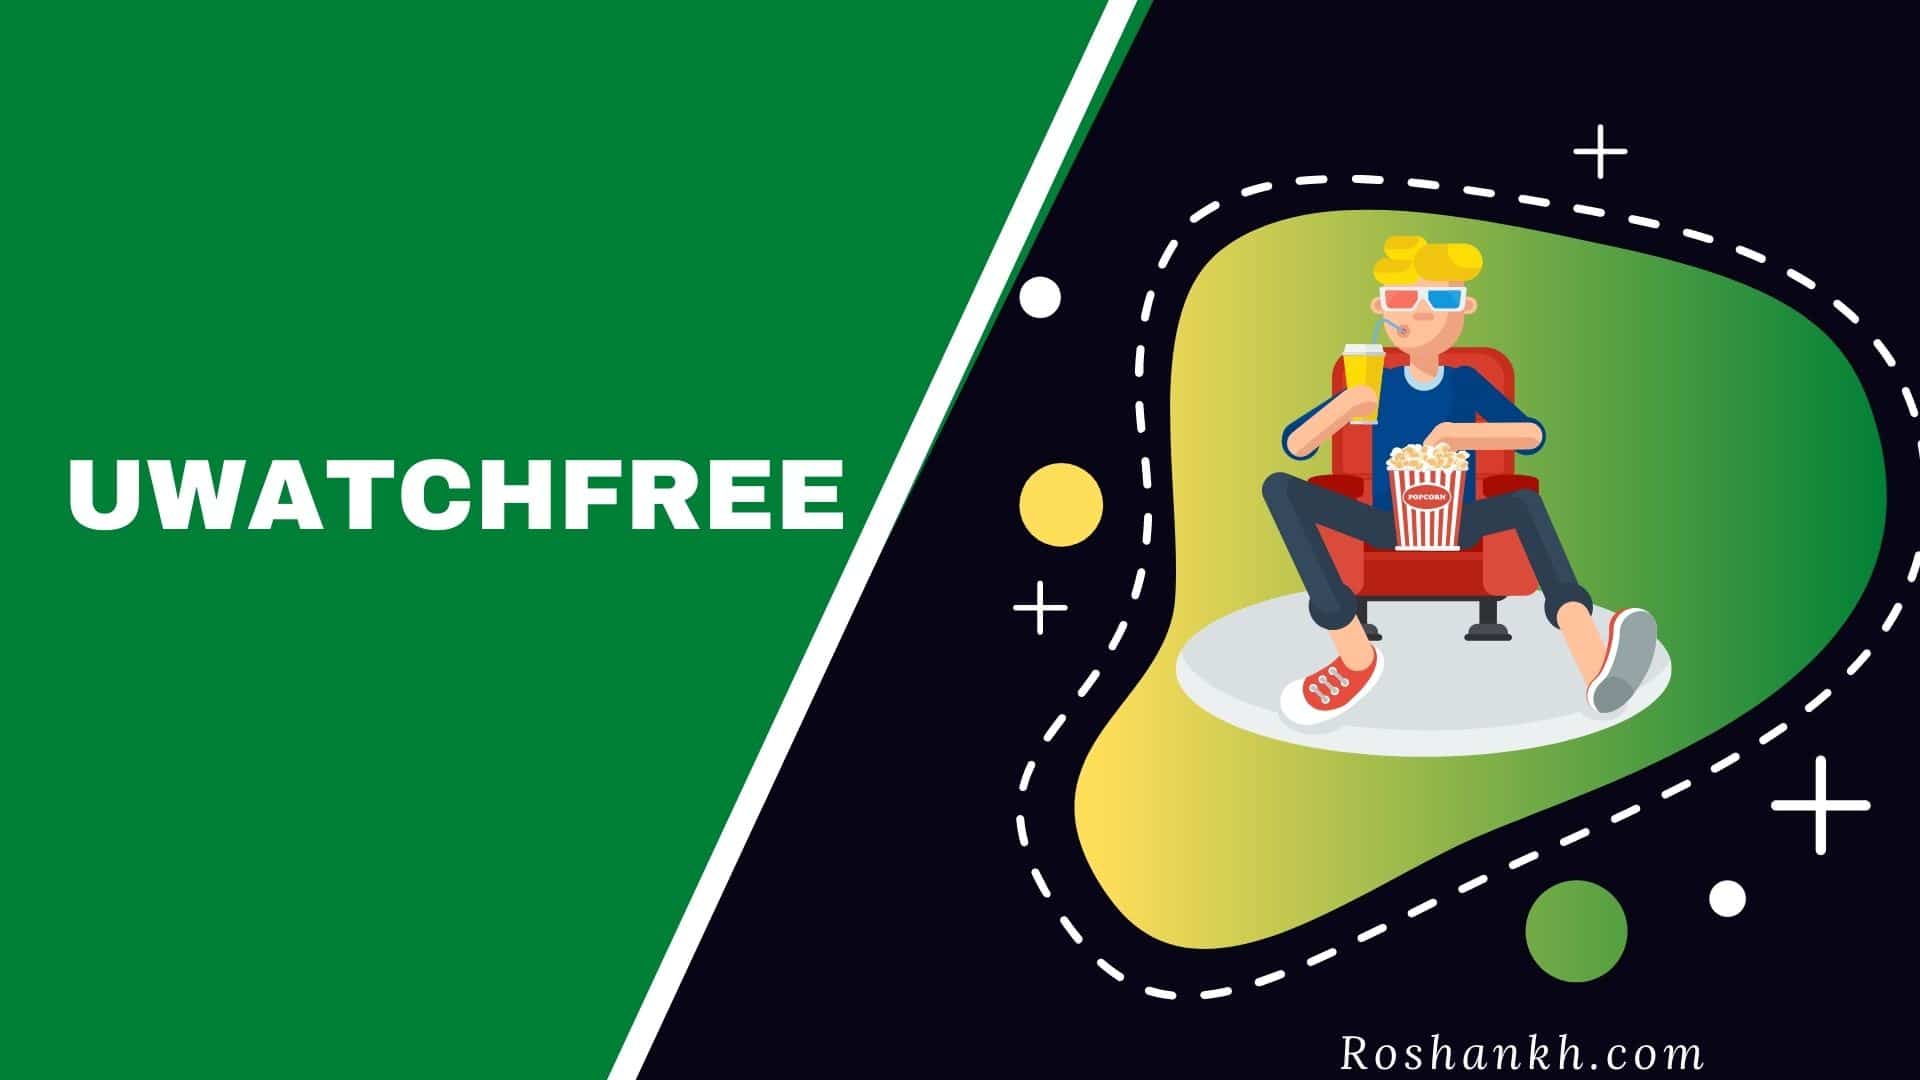 UWatchFree – How To Watch Movies And TV-Series Online Free?